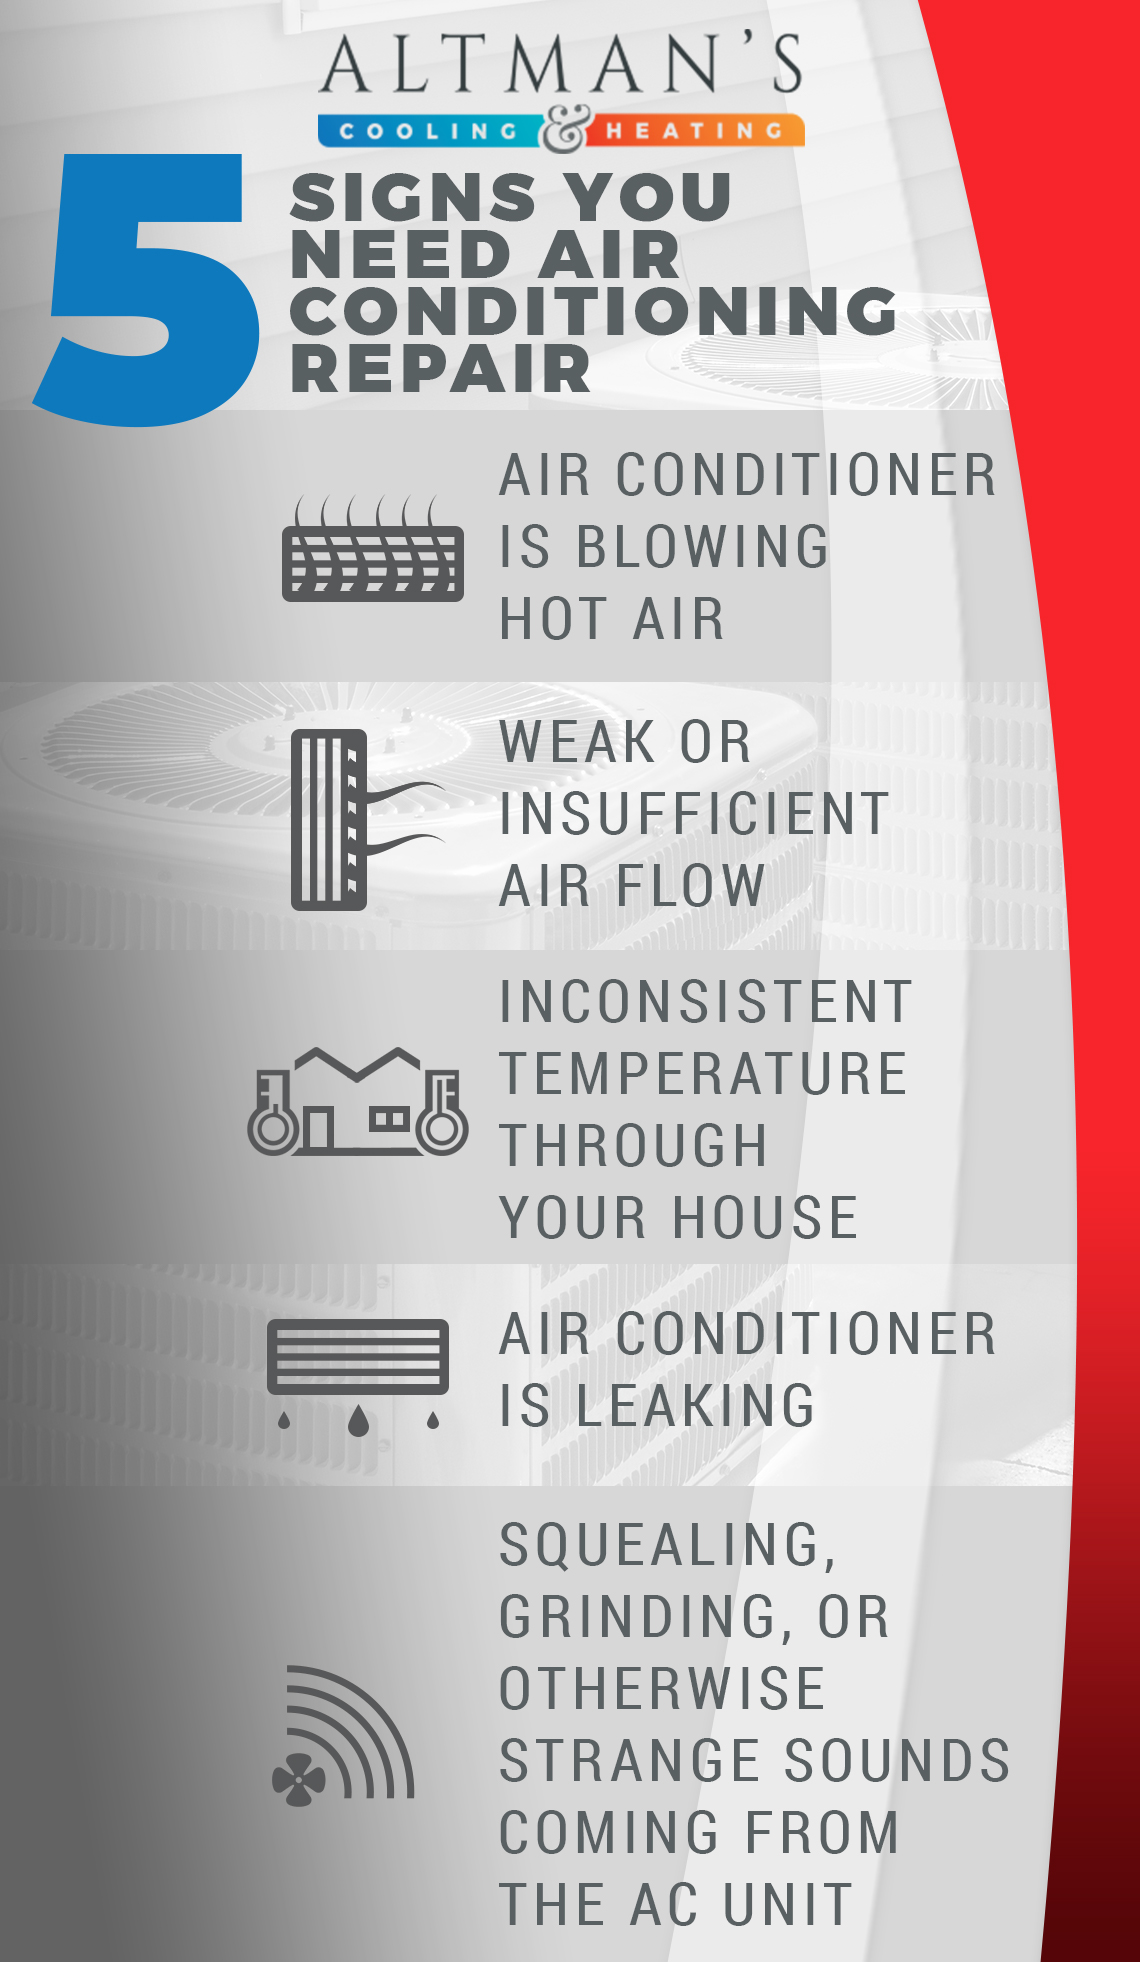 3 Common Signs You Need an Air Conditioning Repair